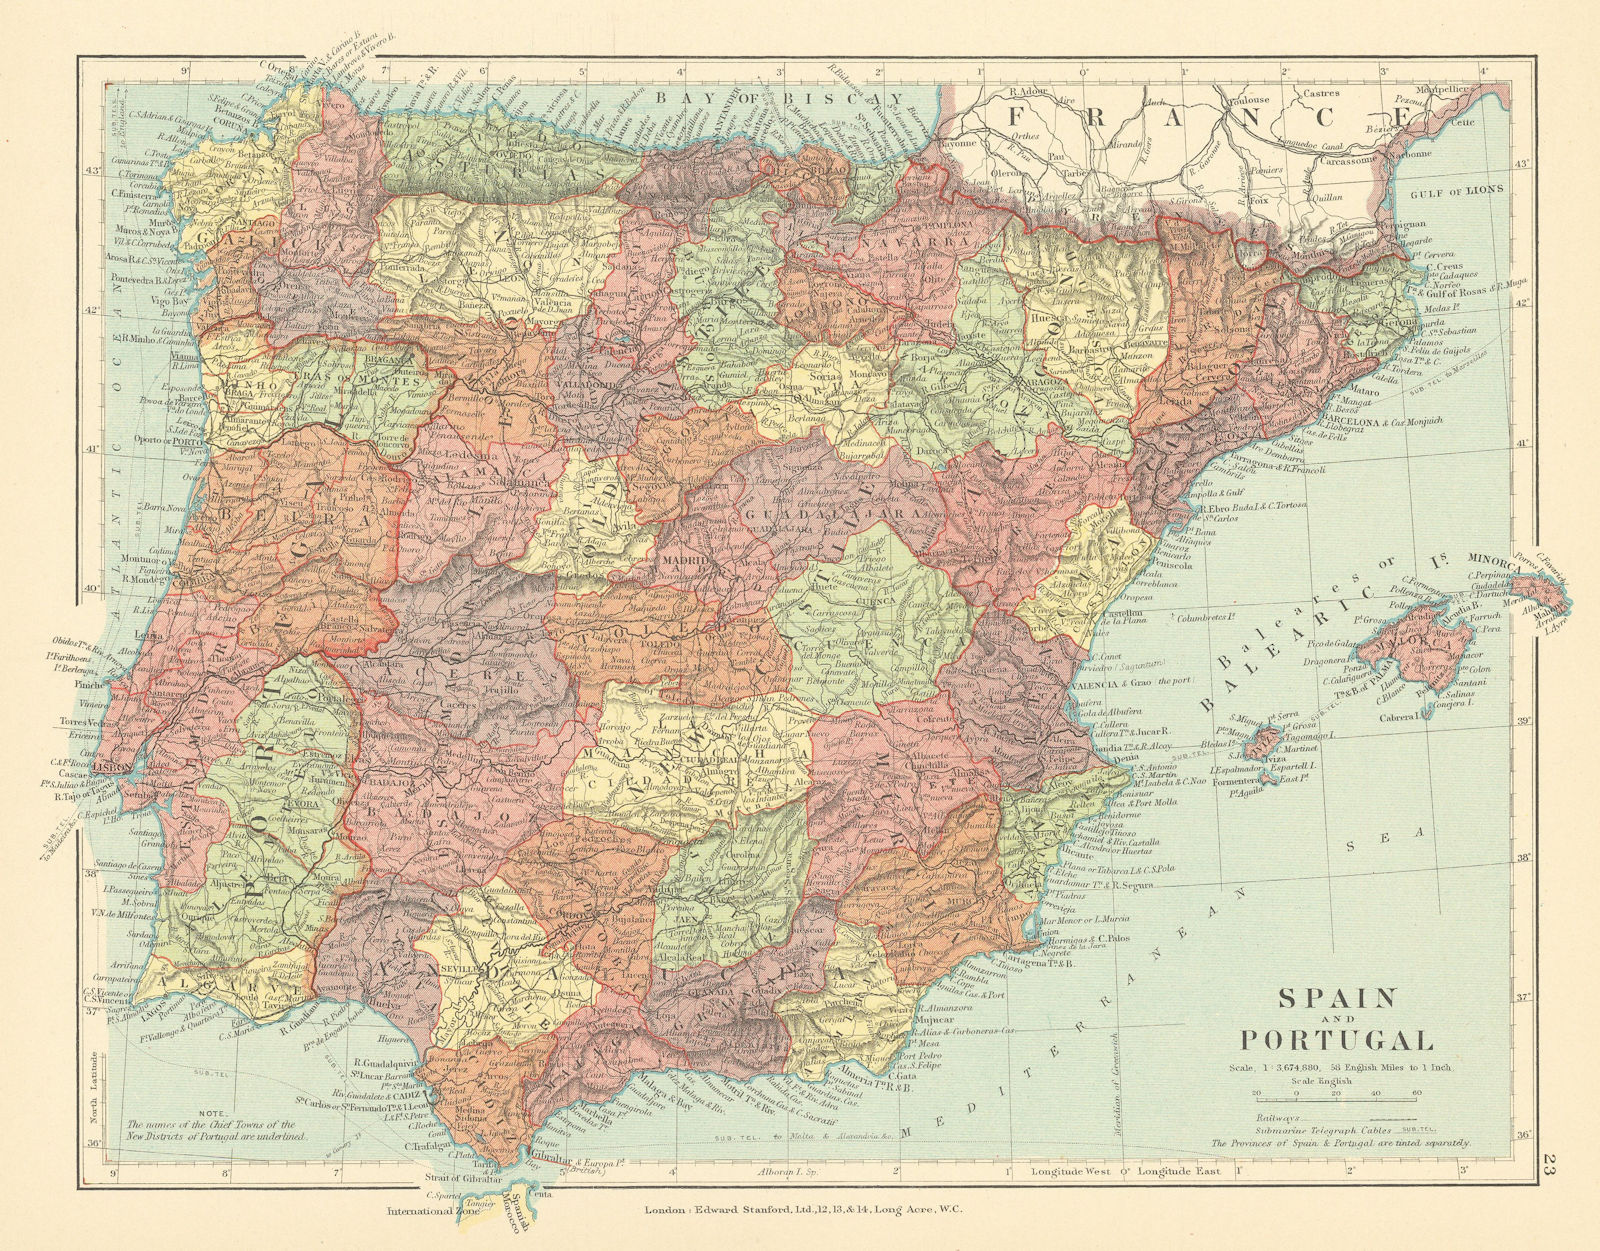 Associate Product Spain & Portugal. Iberia. Tangier International Zone. STANFORD c1925 old map